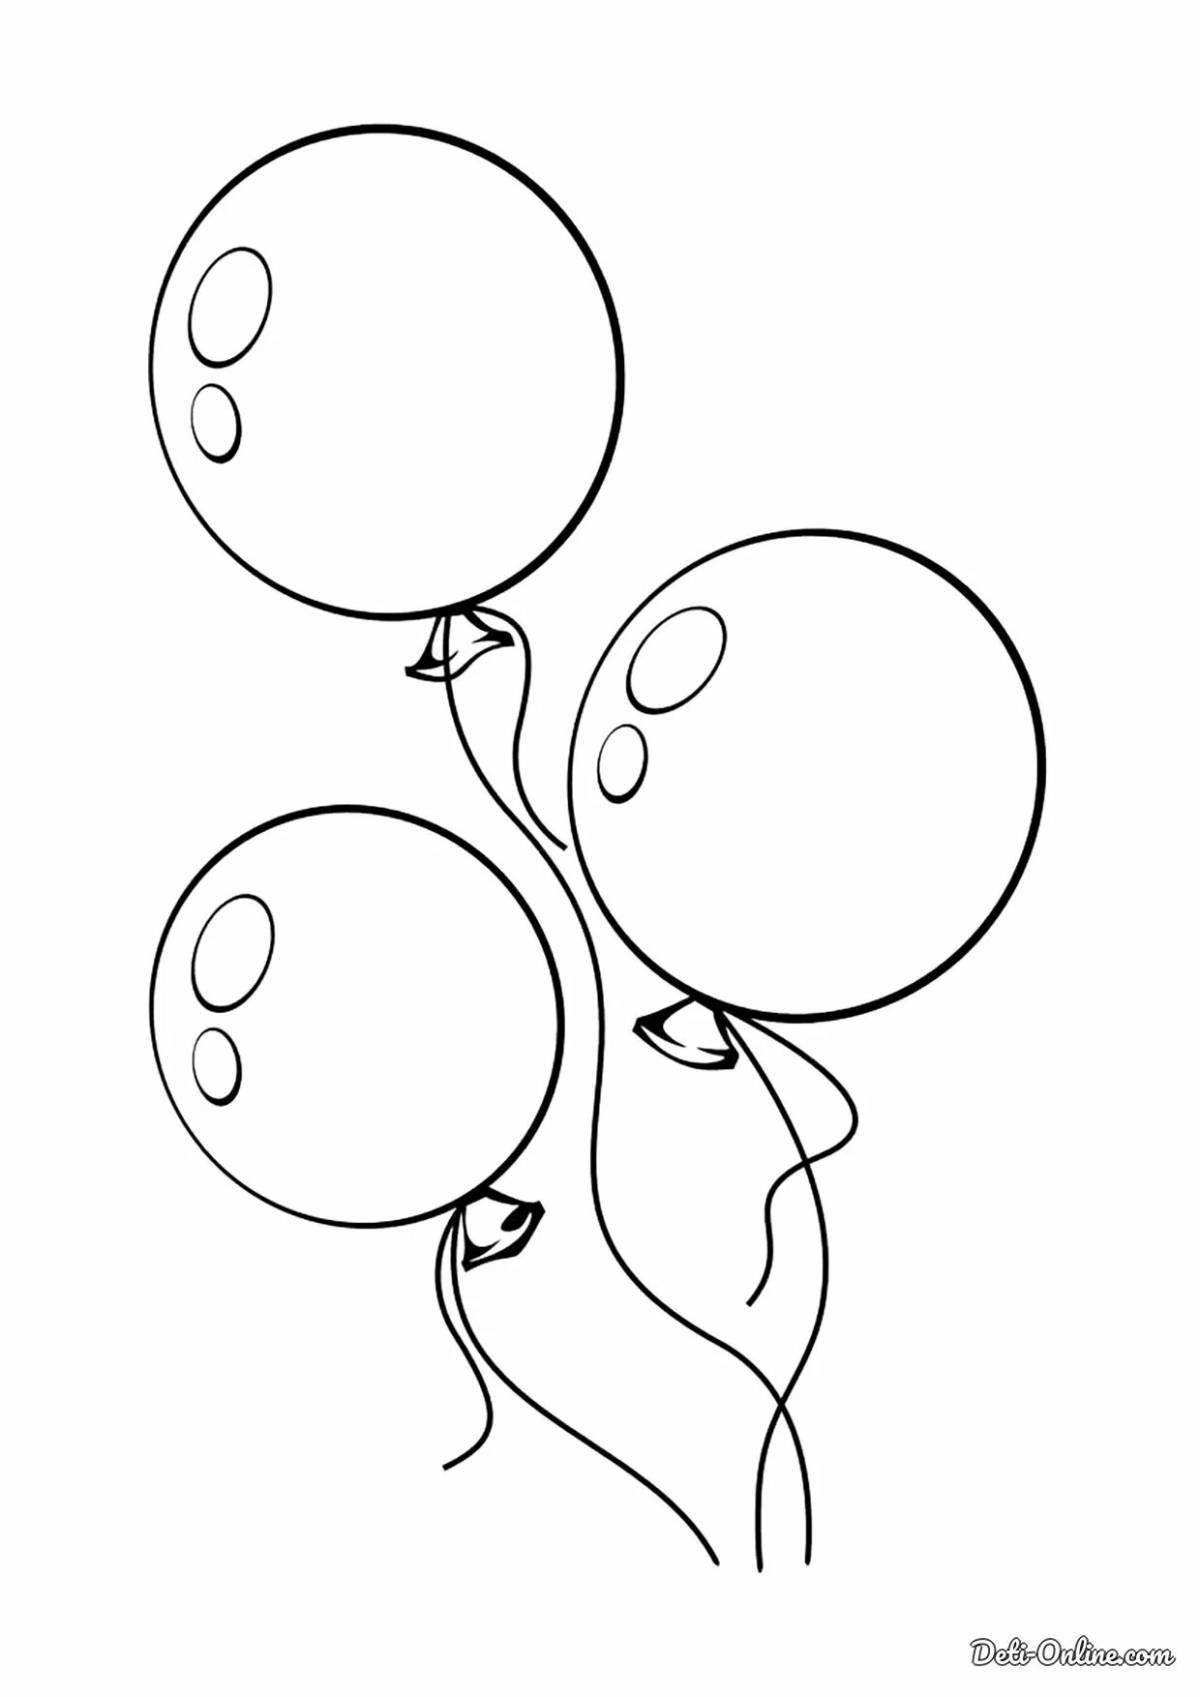 Crazy ball coloring page for 3-4 year olds